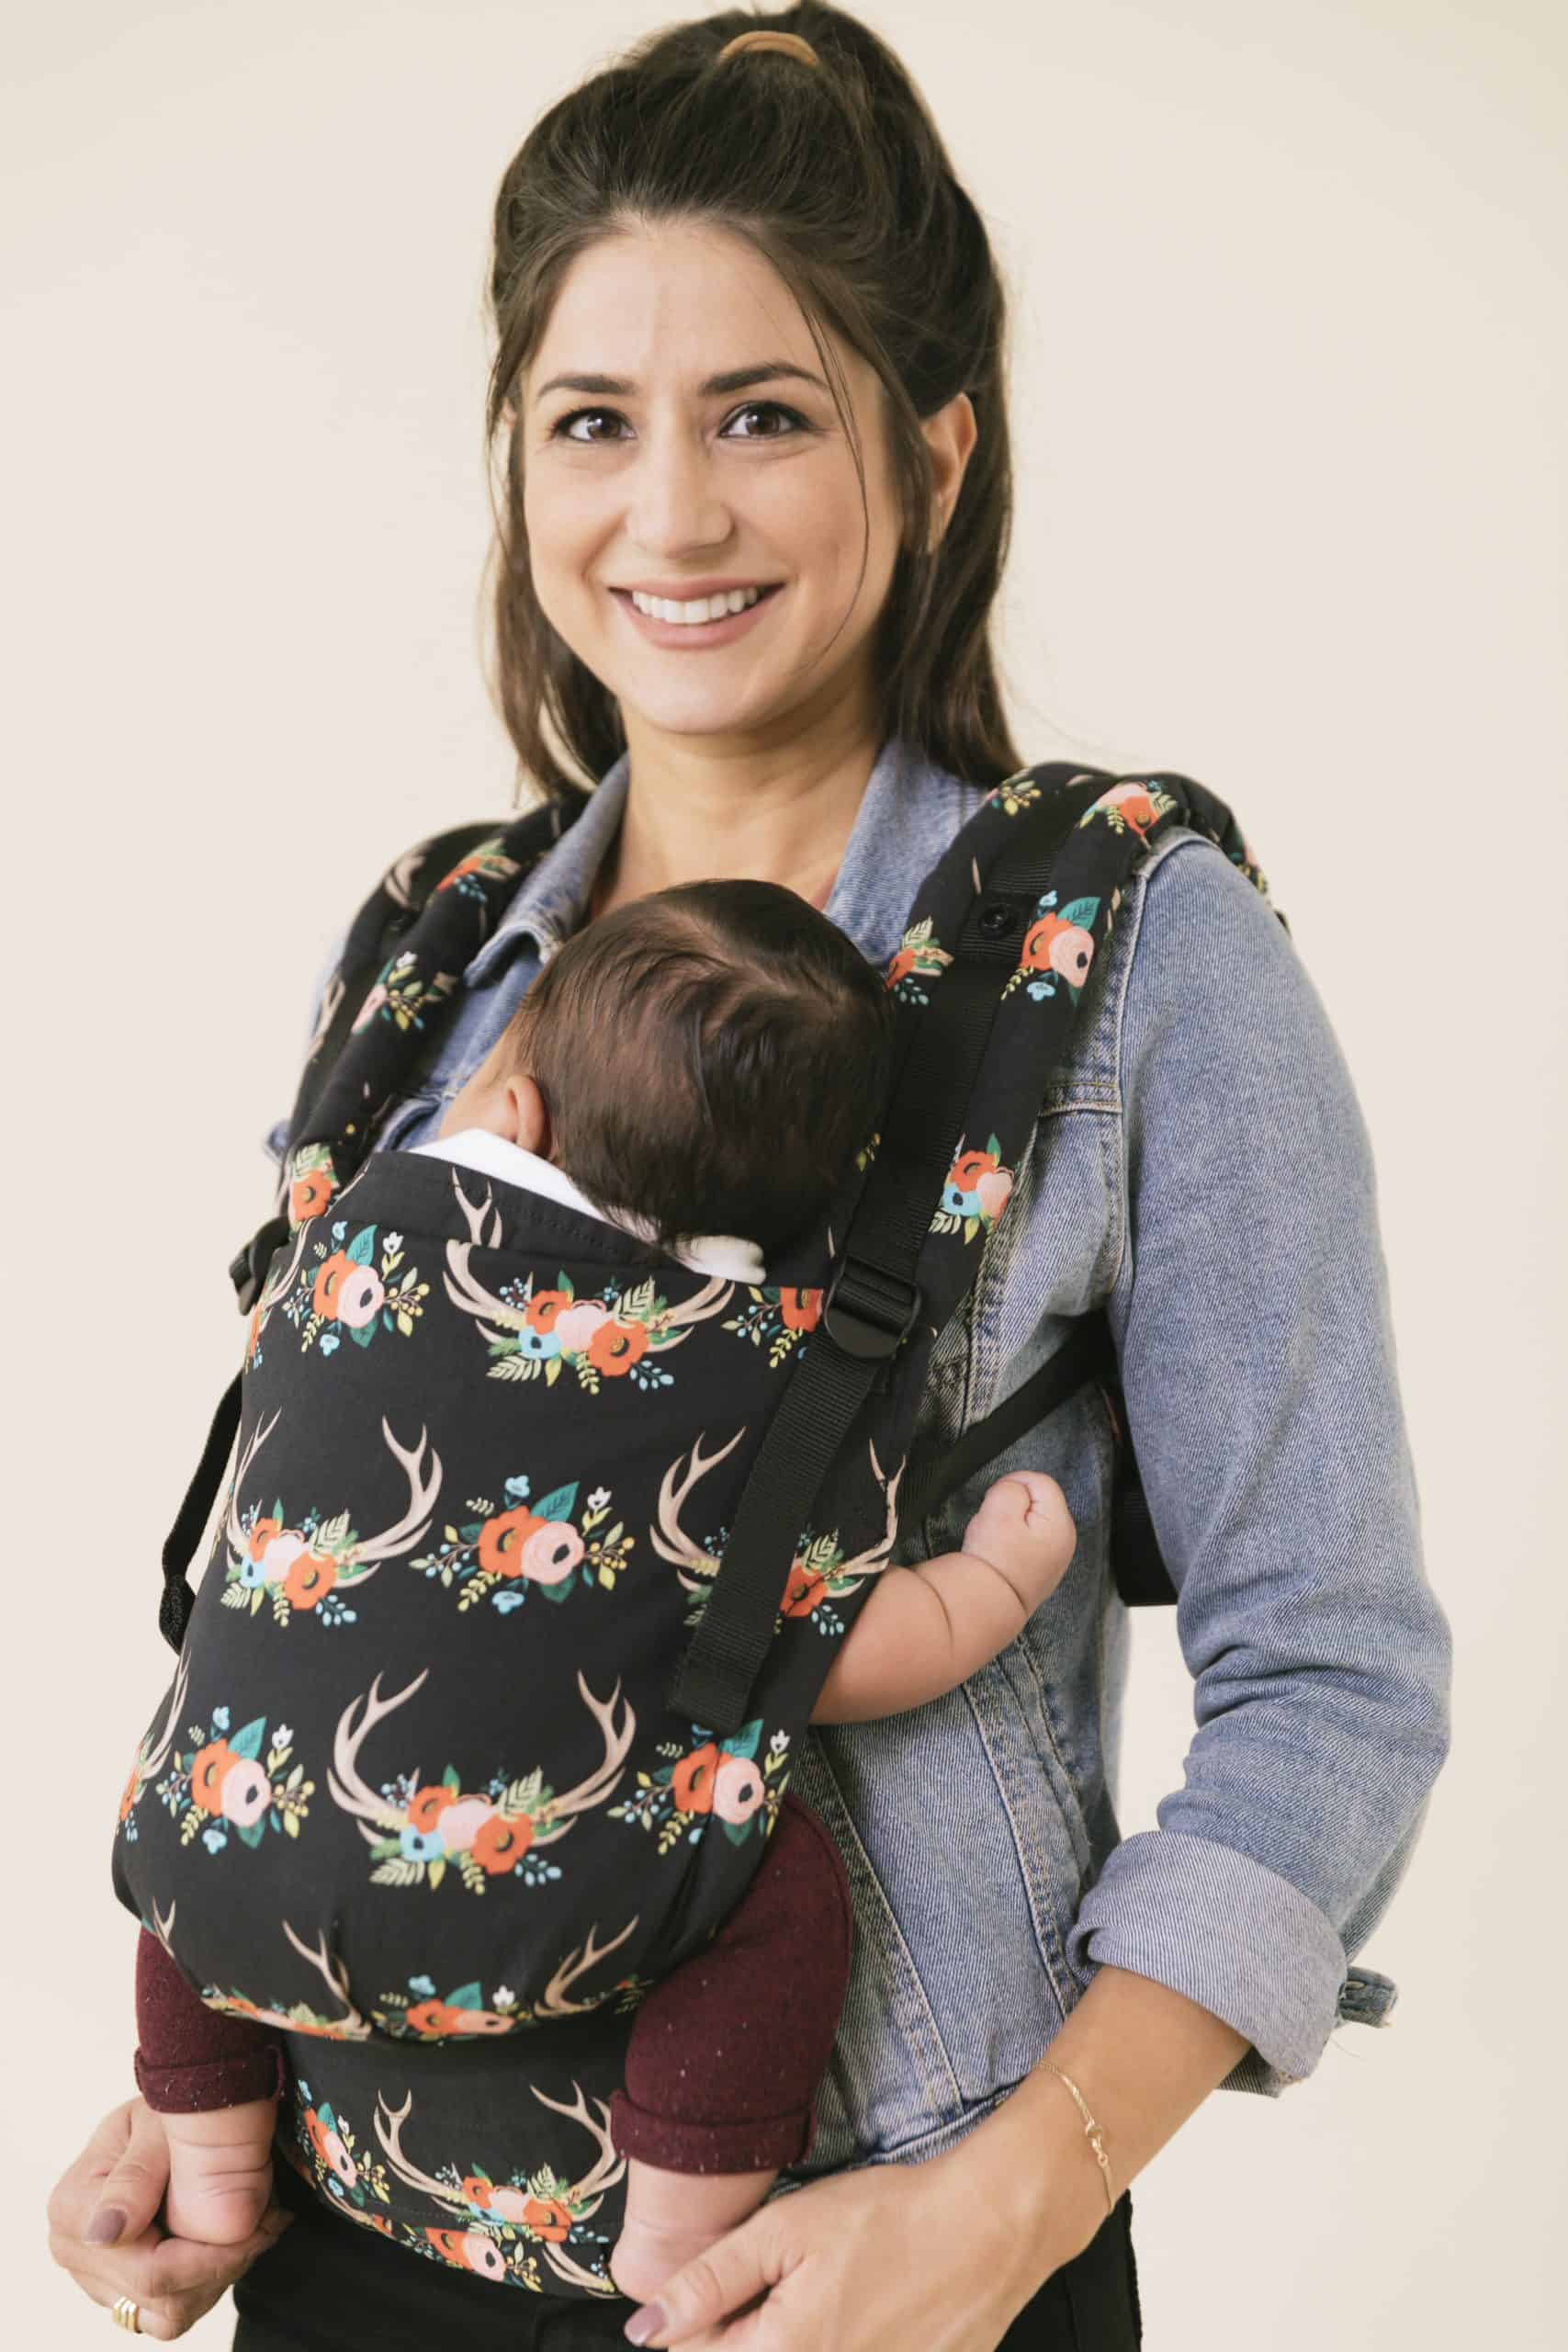 cheap tula baby carrier